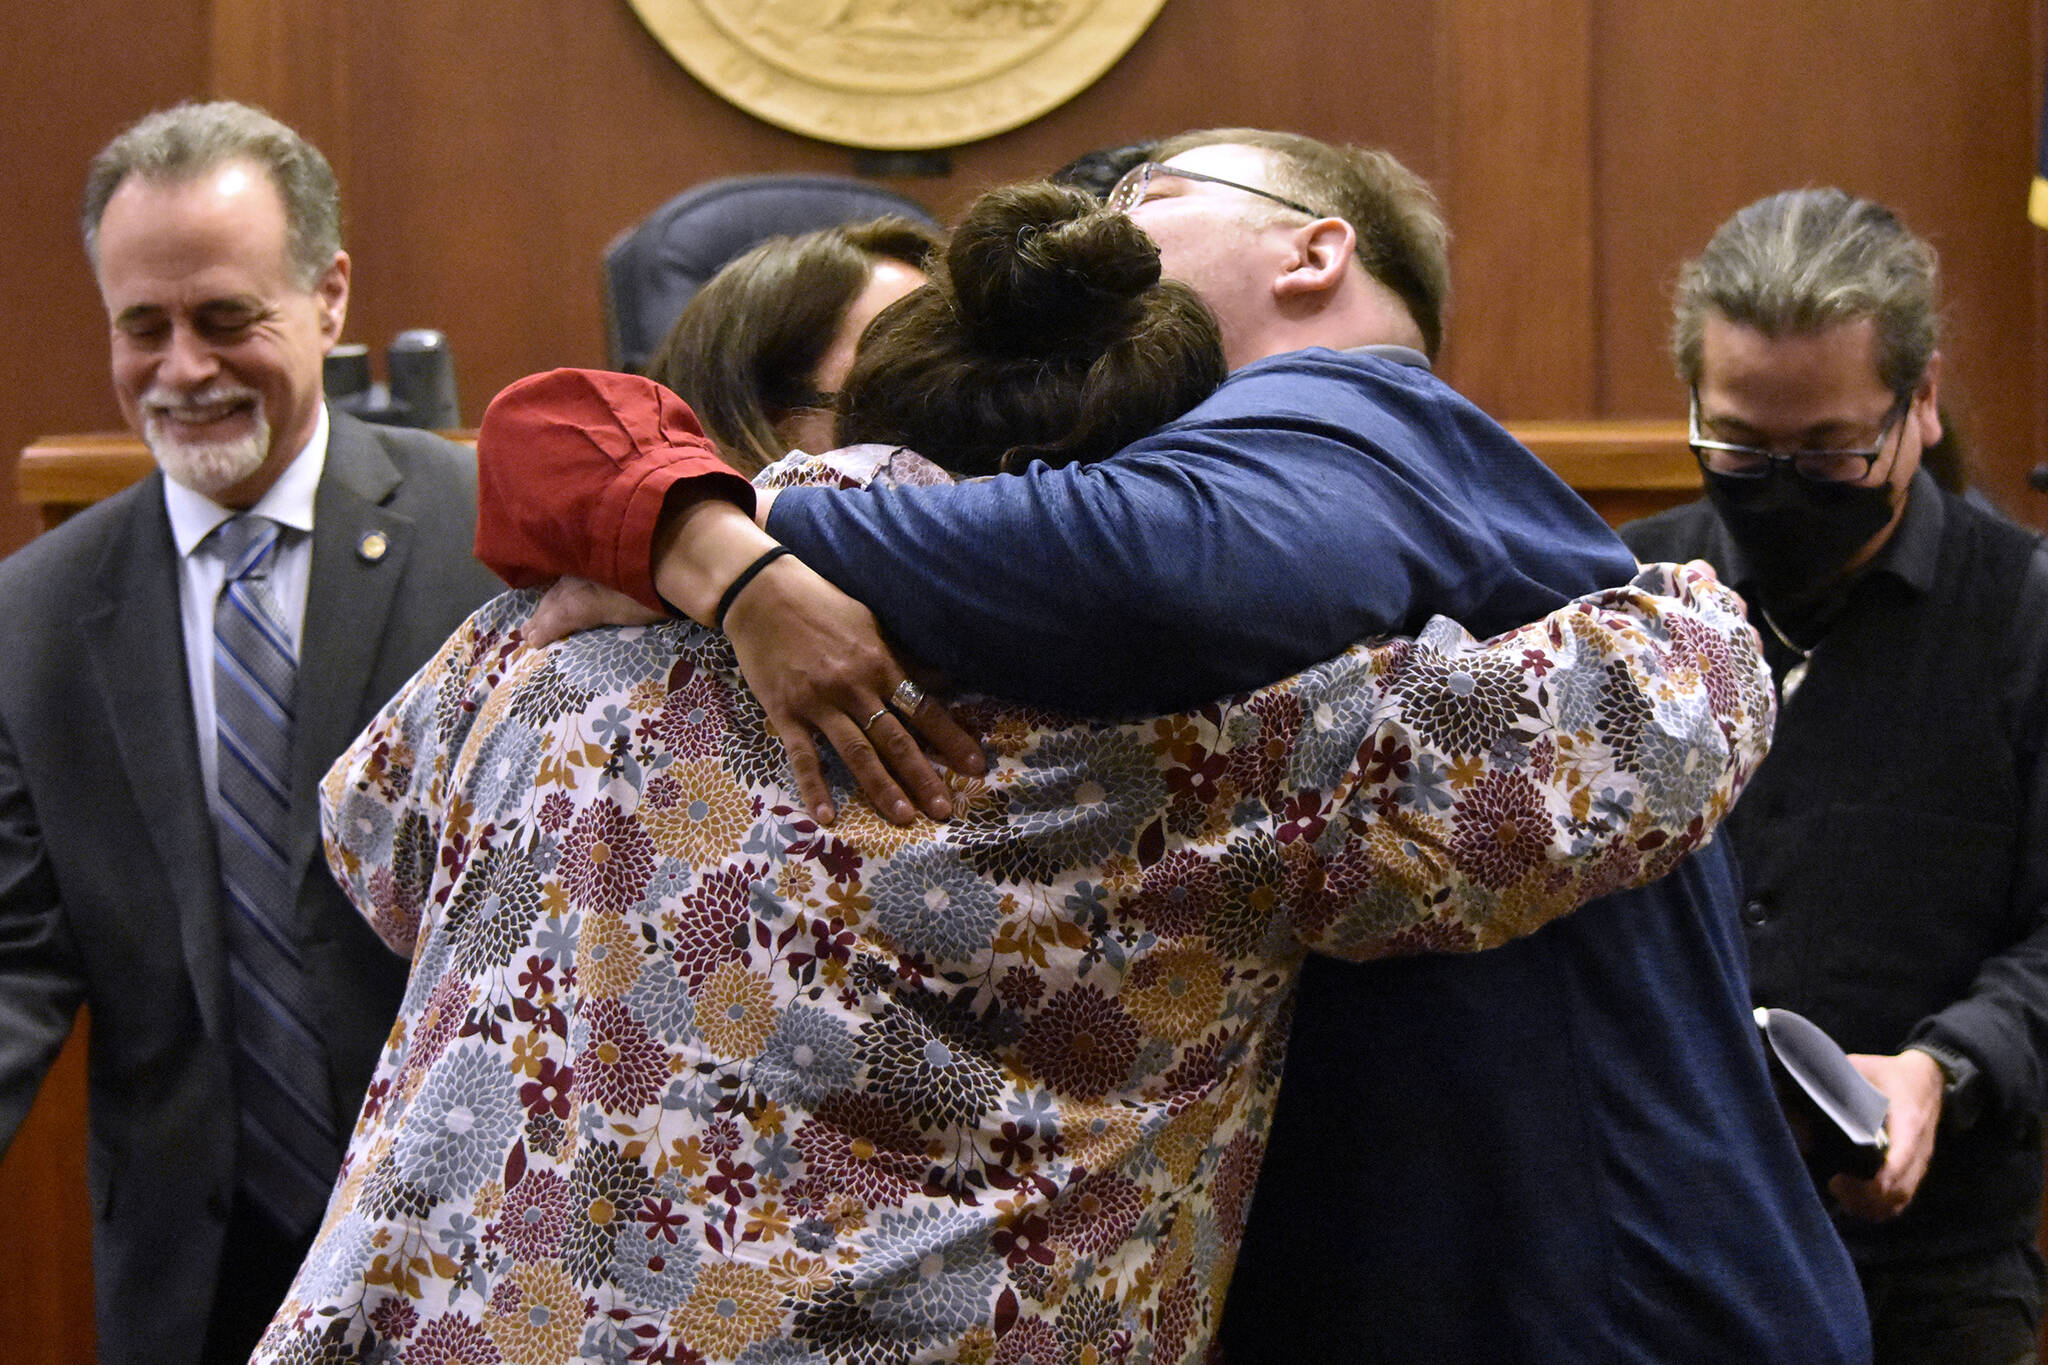 Alaskans for Better Government members La quen náay Liz Medicine Crow, Richard Chalyee Éesh Peterson and ‘Wáahlaal Gidáak Barbara Blake embrace on the floor of the Alaska State Senate on Friday, May 13, 2022, following the passage of House Bill 123, a bill to formally recognize the state’s 229 already federally-recognized tribes. (Peter Segall / Juneau Empire)